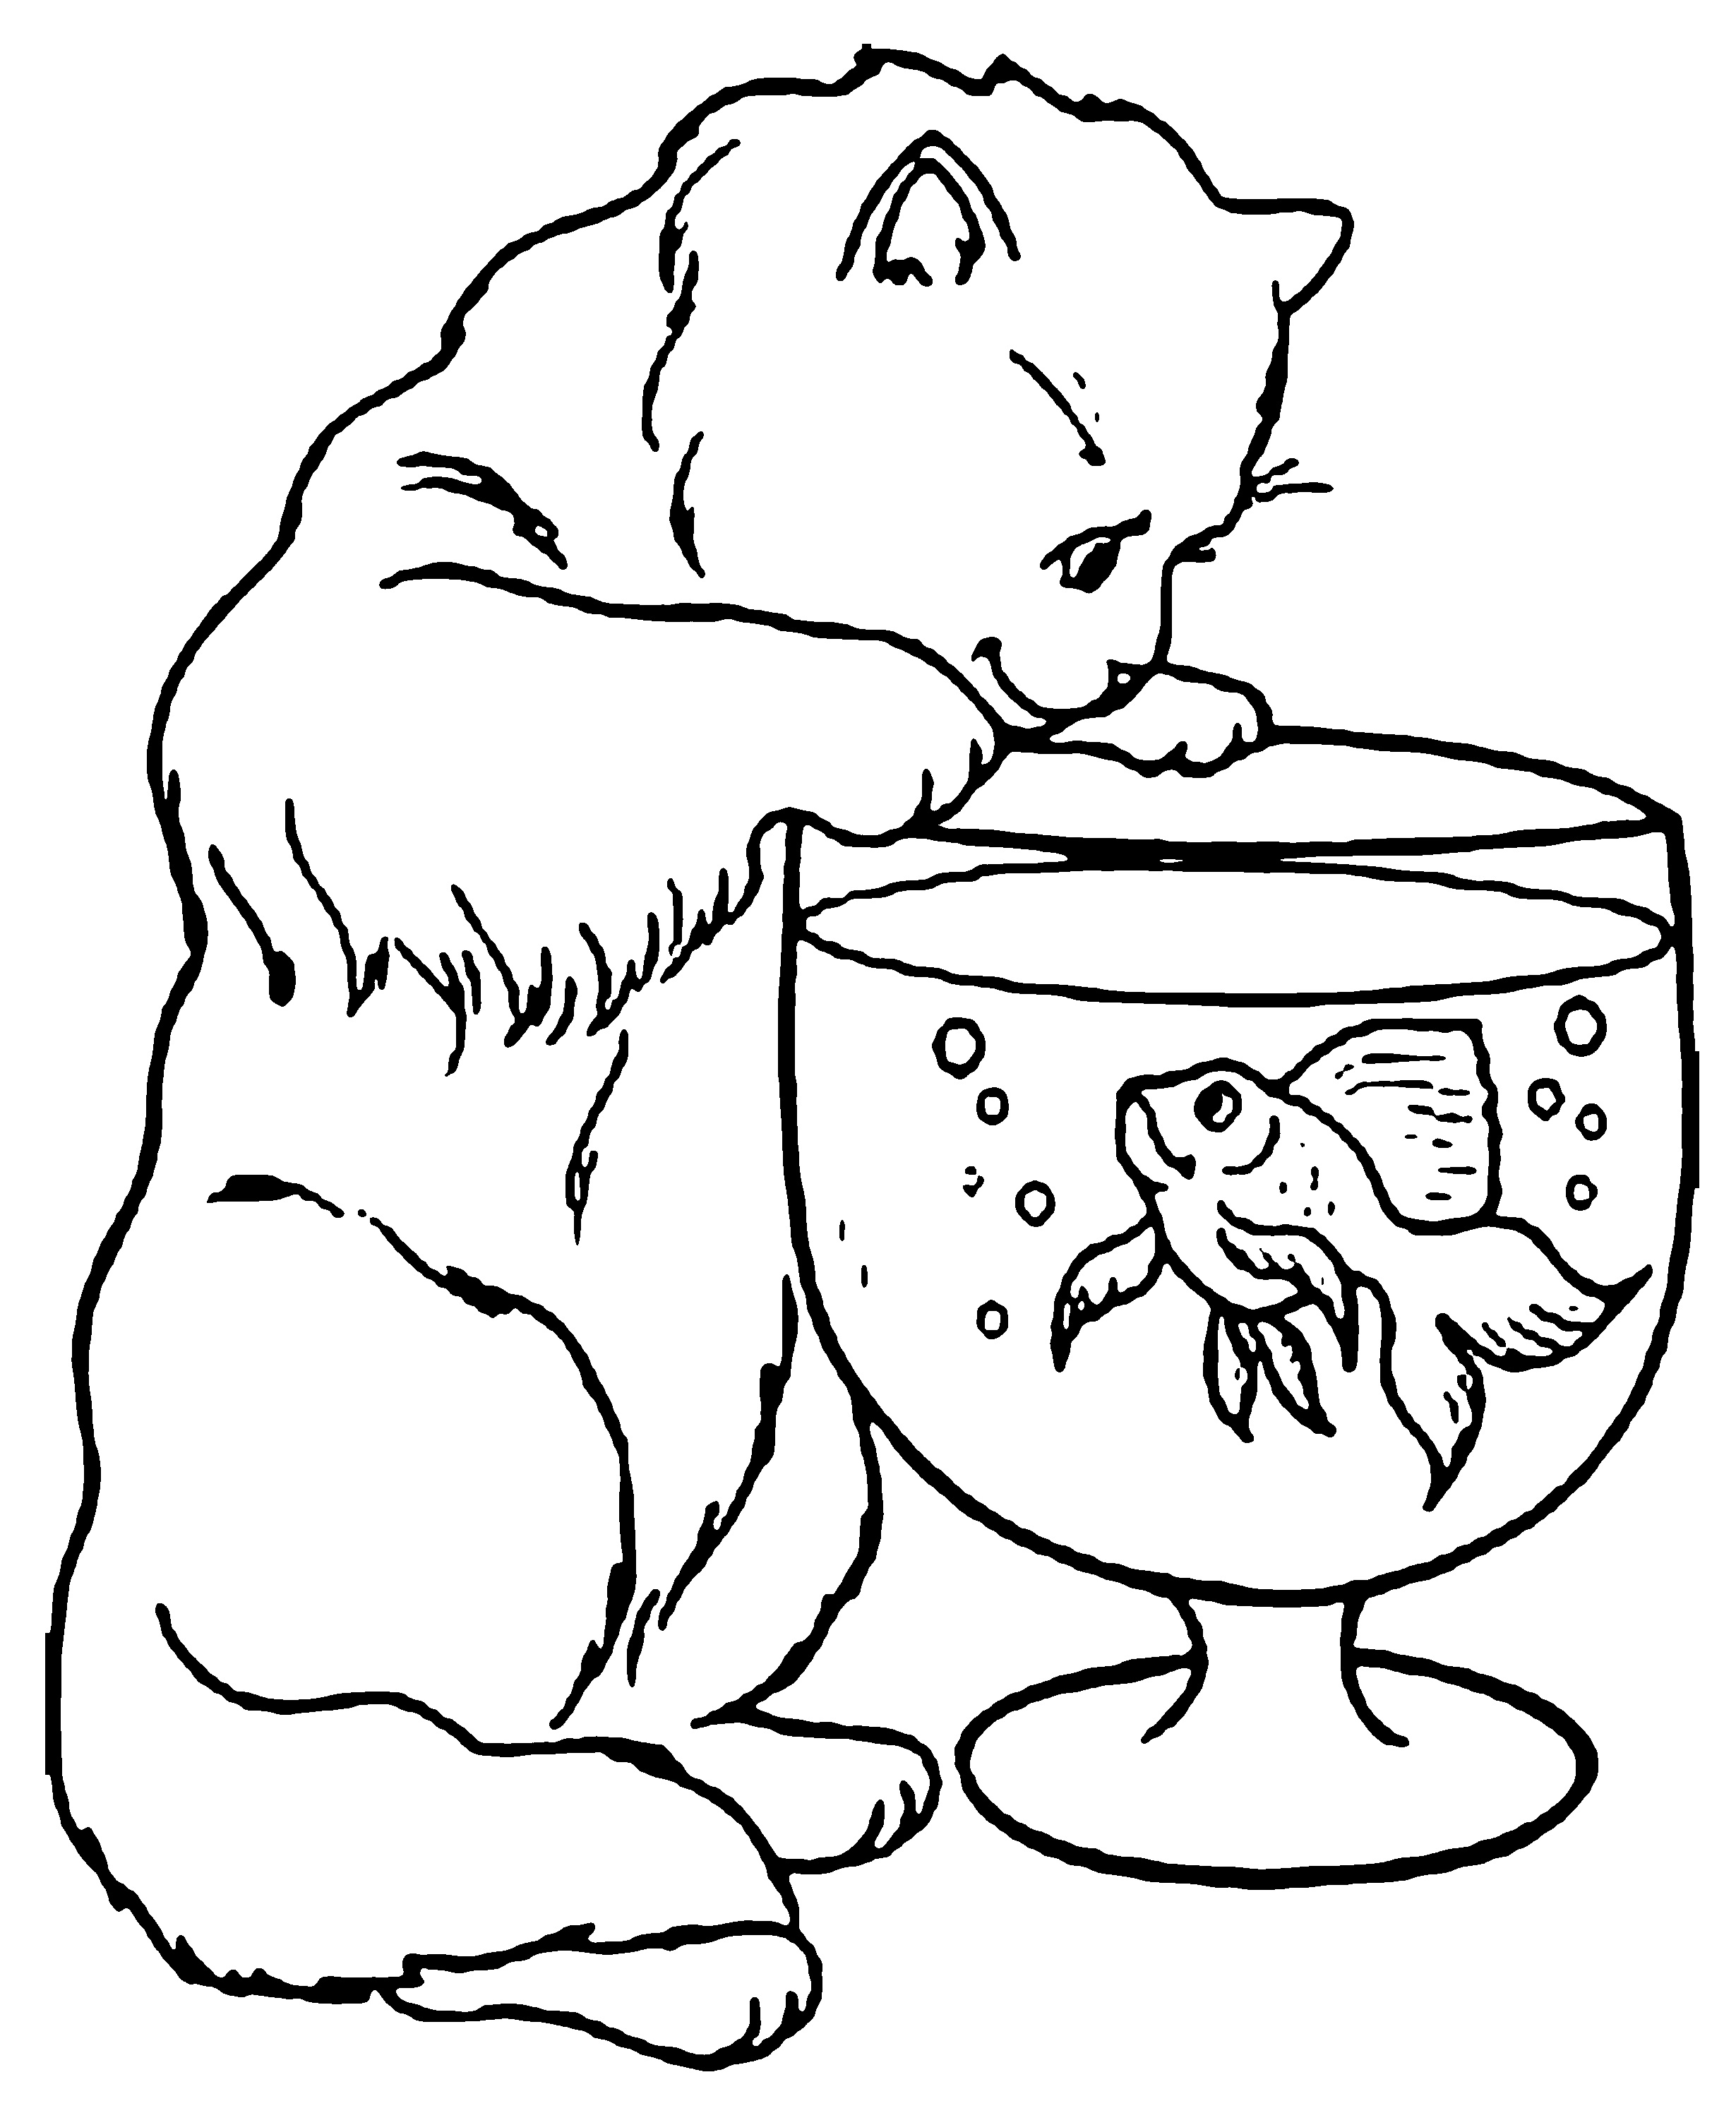 cat-coloring-page-pictures-animal-place